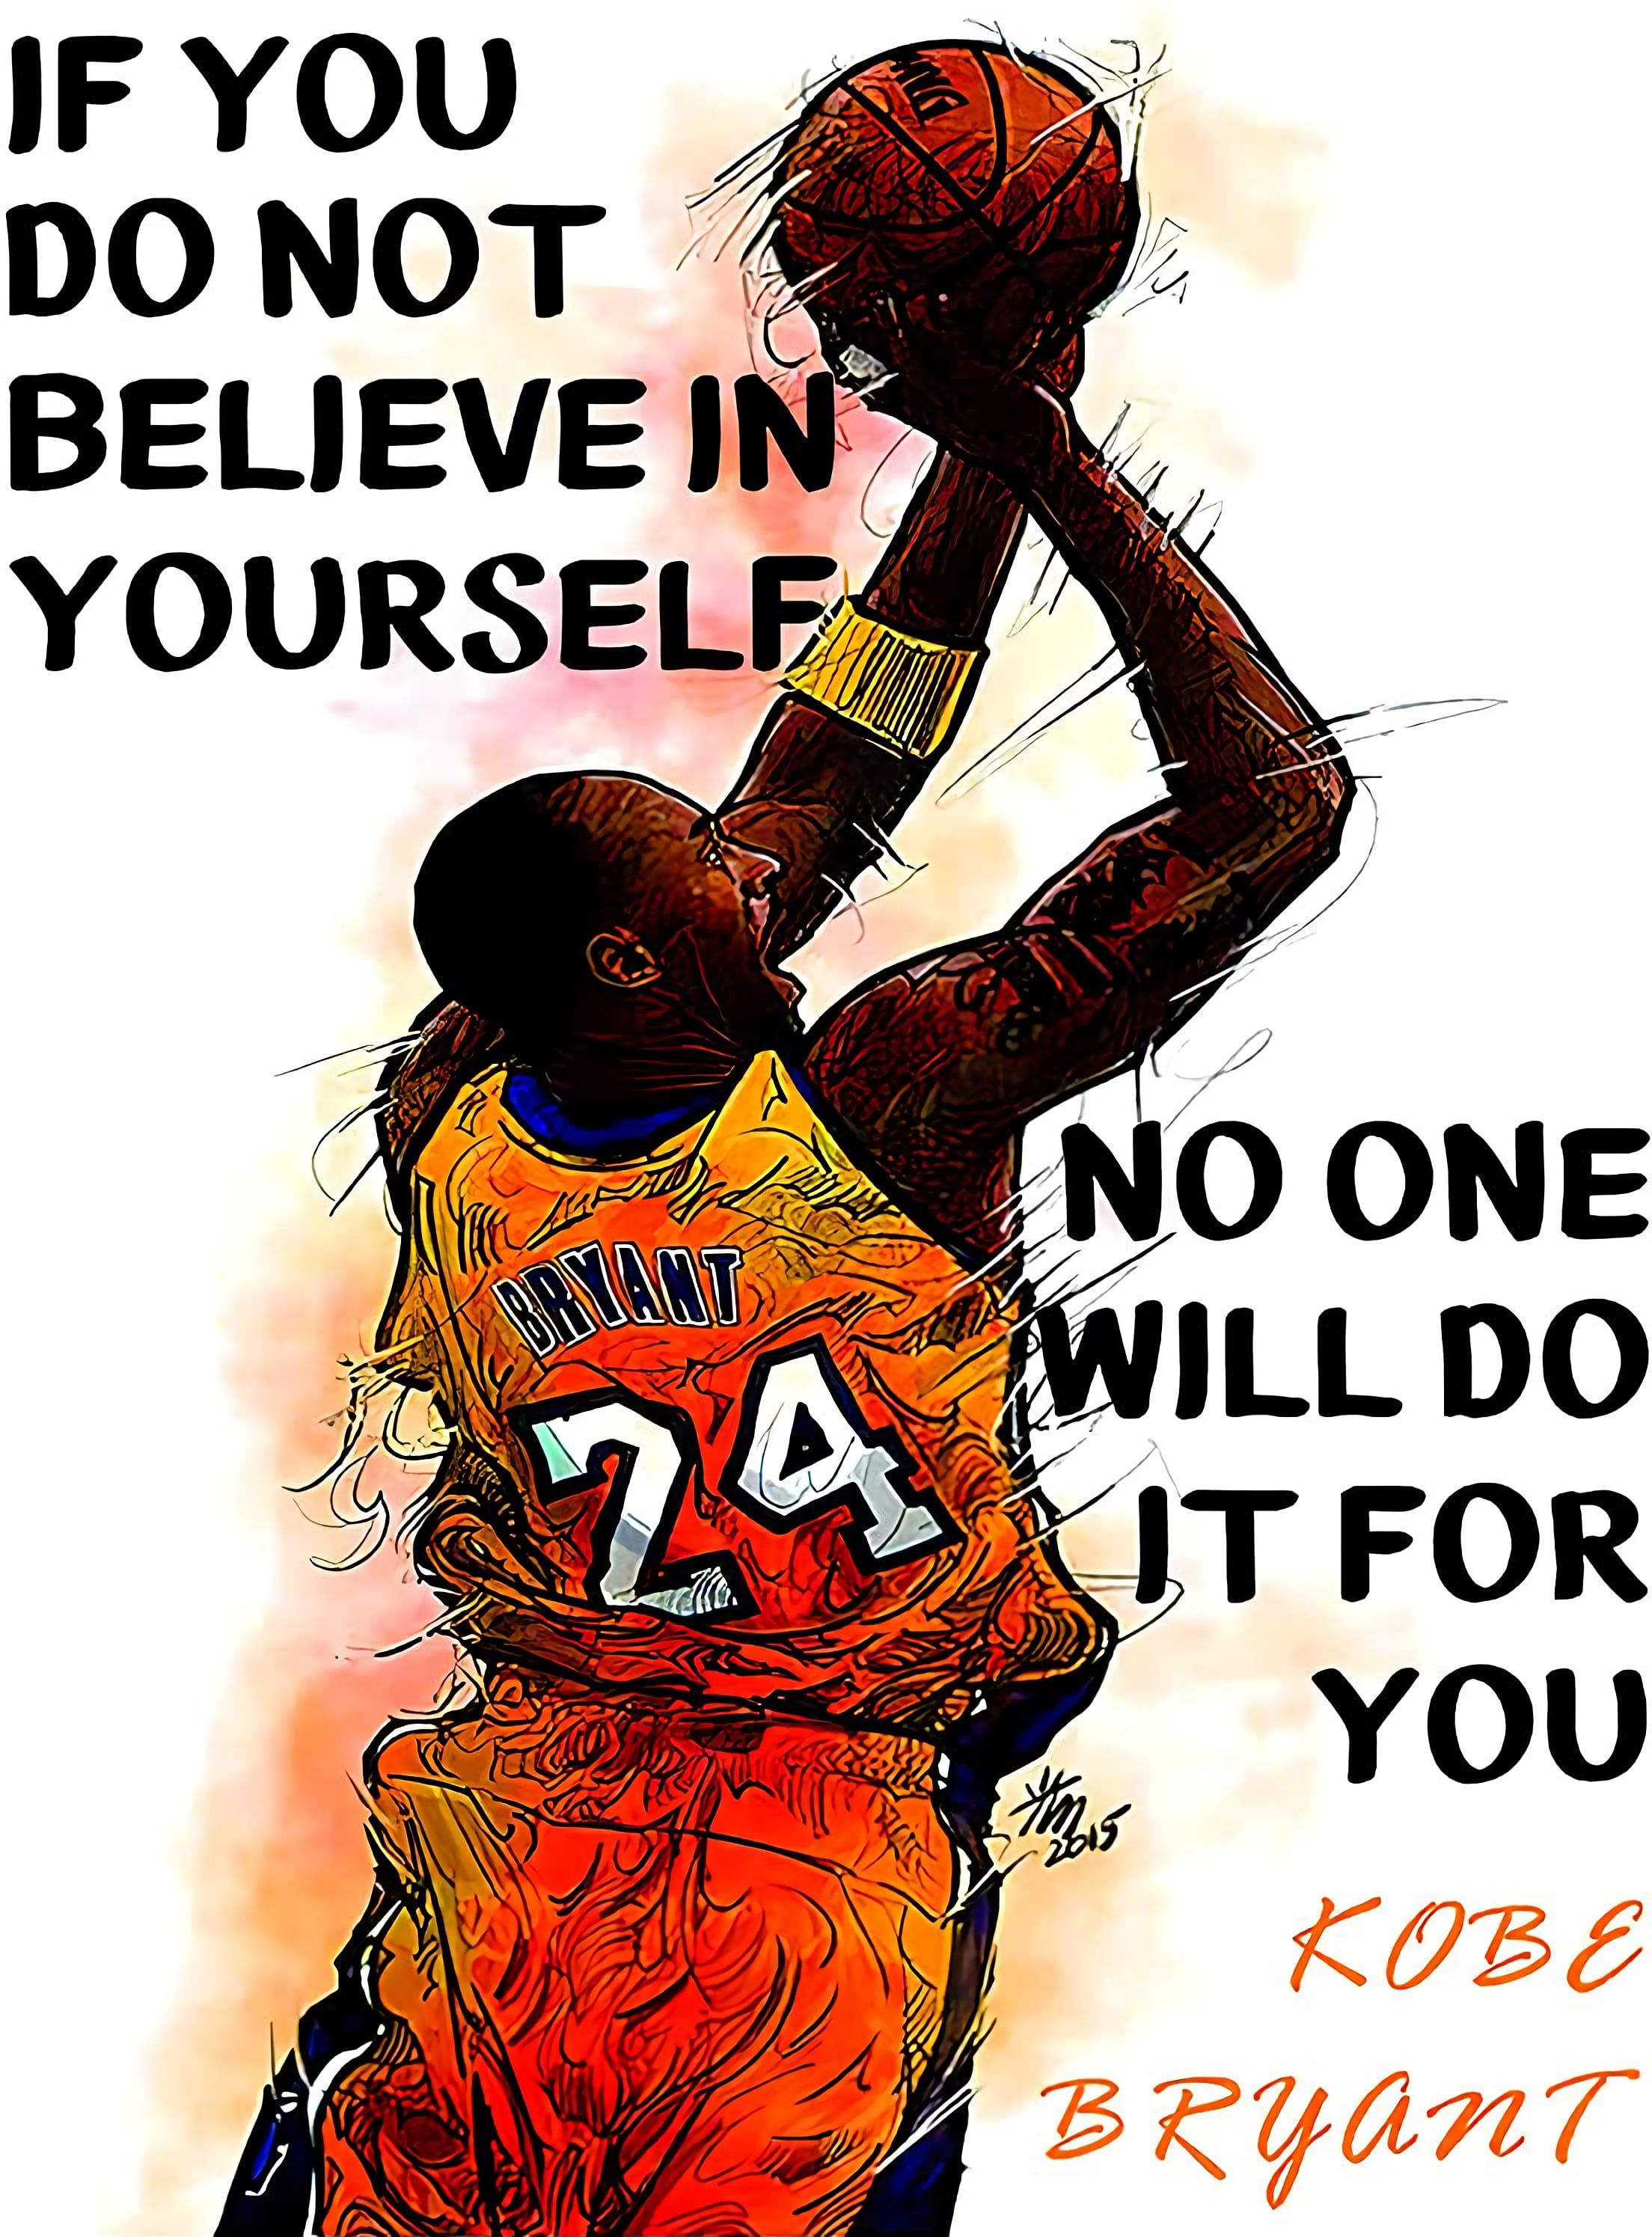 Kobe Bryant, basketball player, quote, If you do not believe in yourself, no one will do it for you. - Kobe Bryant